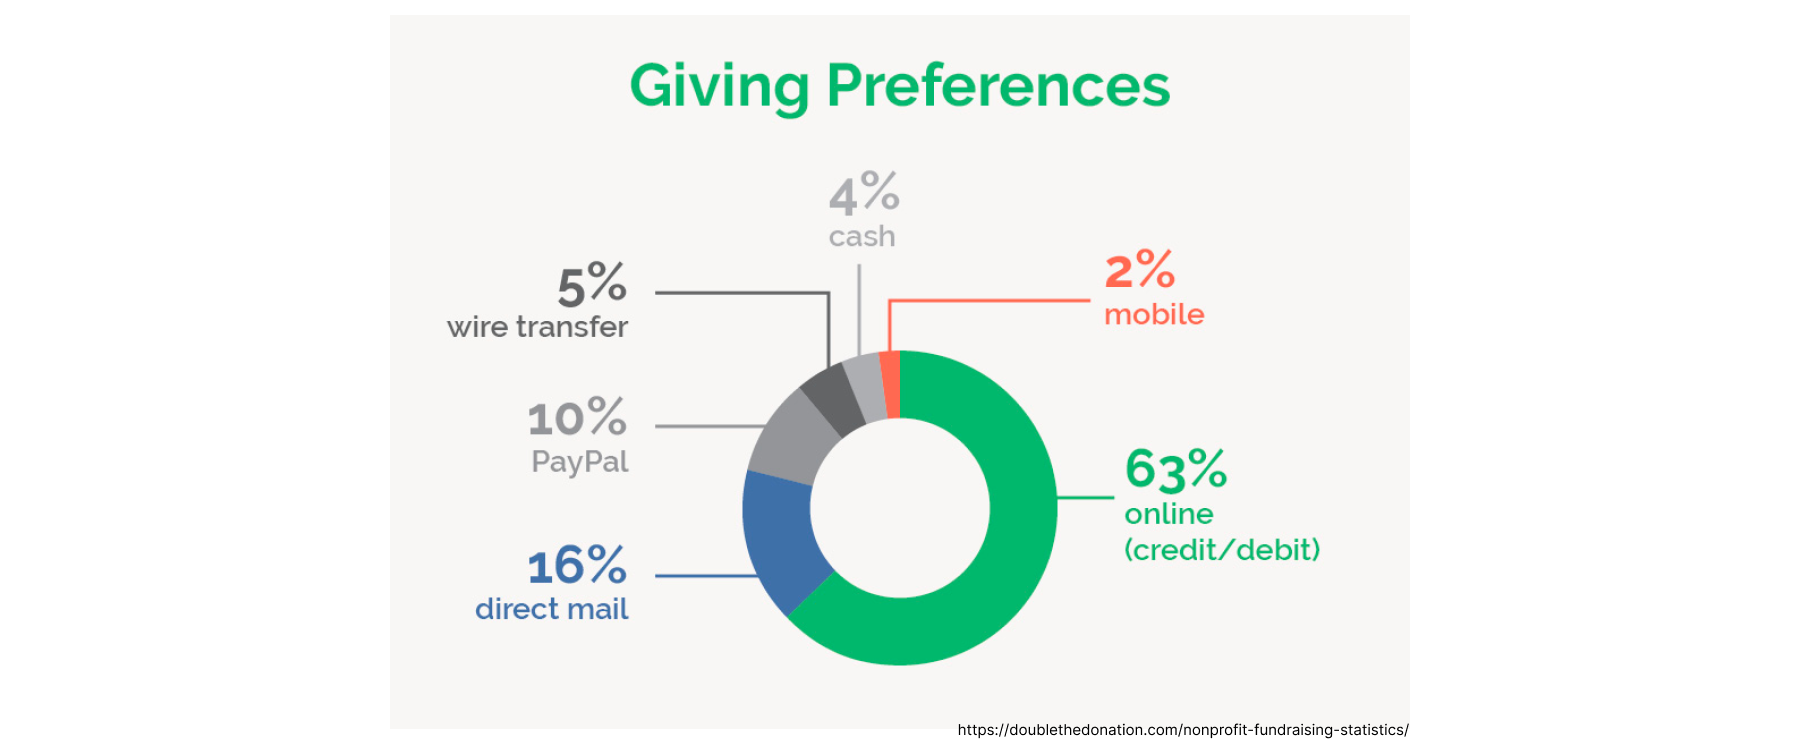 Online fundraising giving preferences donut chart by doublethedonation.com